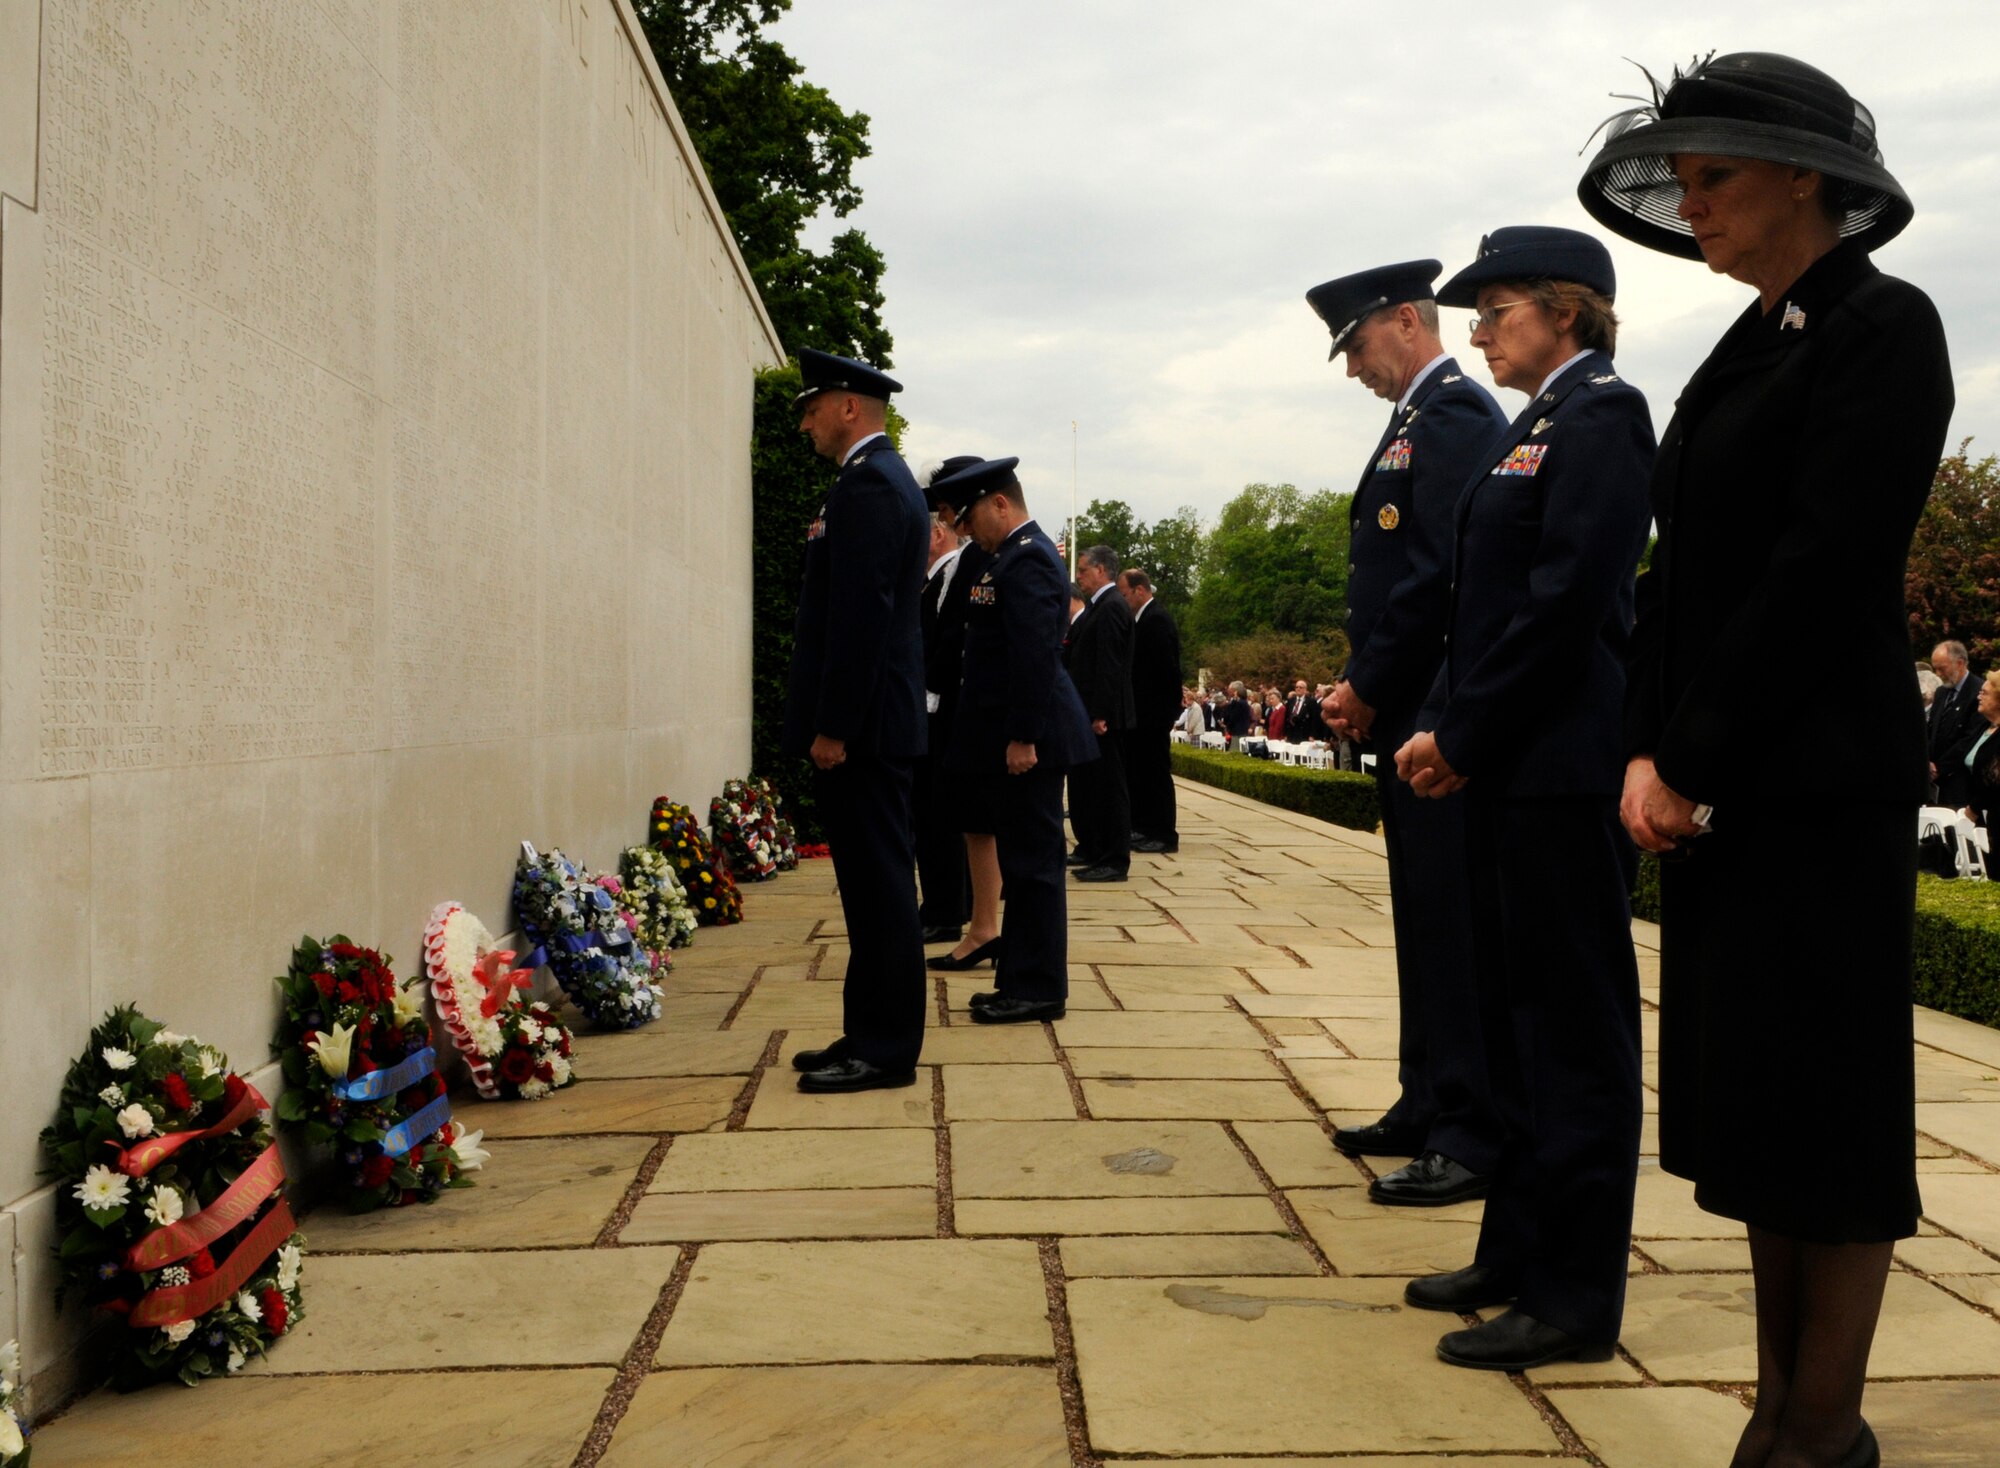 Jonna Doolittle Hoppes, granddaughter of Gen. James H. "Jimmy" Doolittle, Col. Edin J. Murrie, 100th Air Refueling Wing commander, and Maj. Gen. Mark R. Zamzow, 3rd Air Force vice commander lay wreaths at the Wall of the Missing at Madingley Memorial Cemetery on Memorial Day, May 25, 2009.  The cemetery is the final resting place for thousands of American veterans.  (U.S. Air Force photo by Senior Airman Christopher L. Ingersoll)